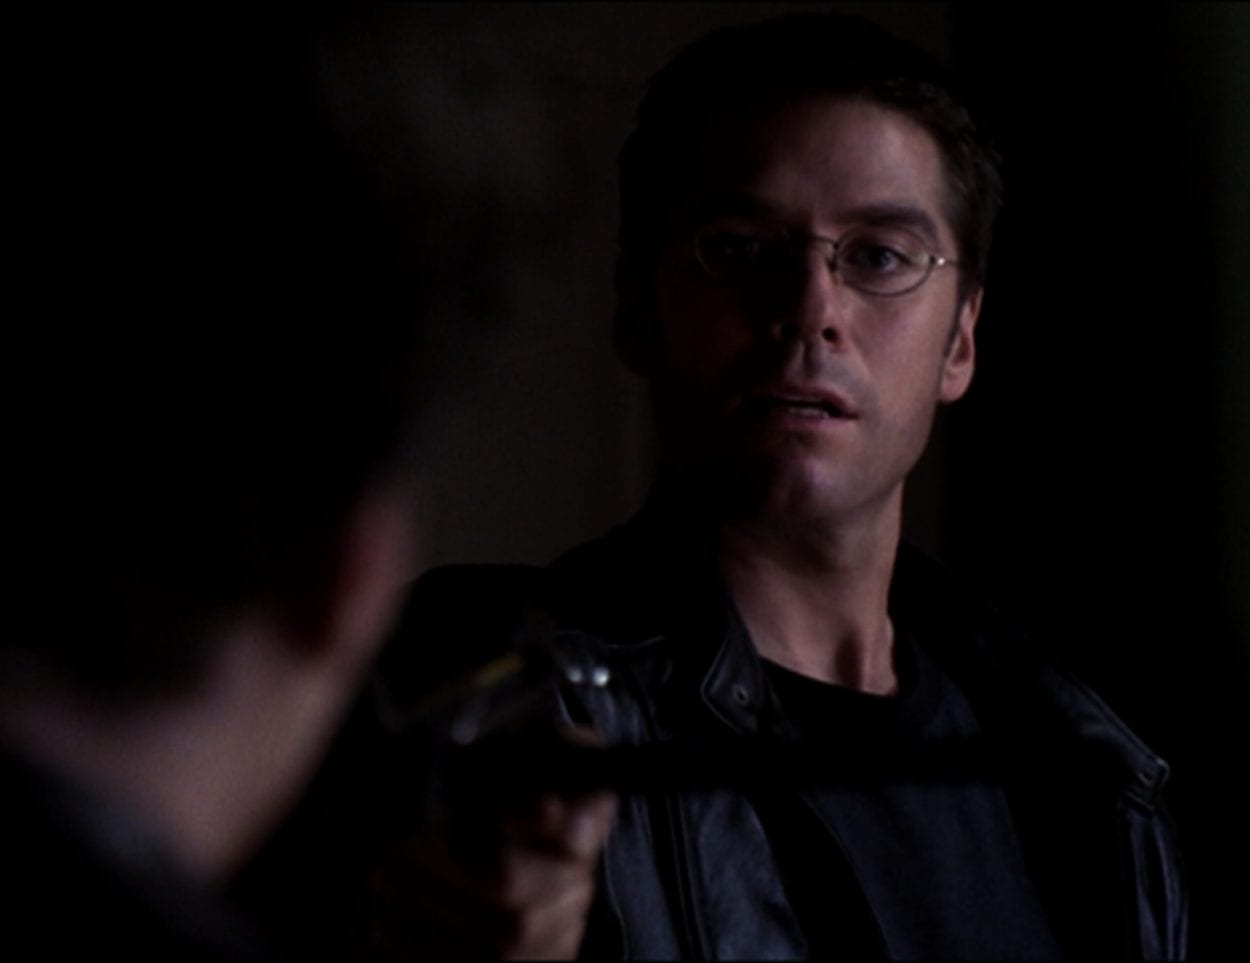 Wesley, wearing a leather jacket, points a crossbow at Angel